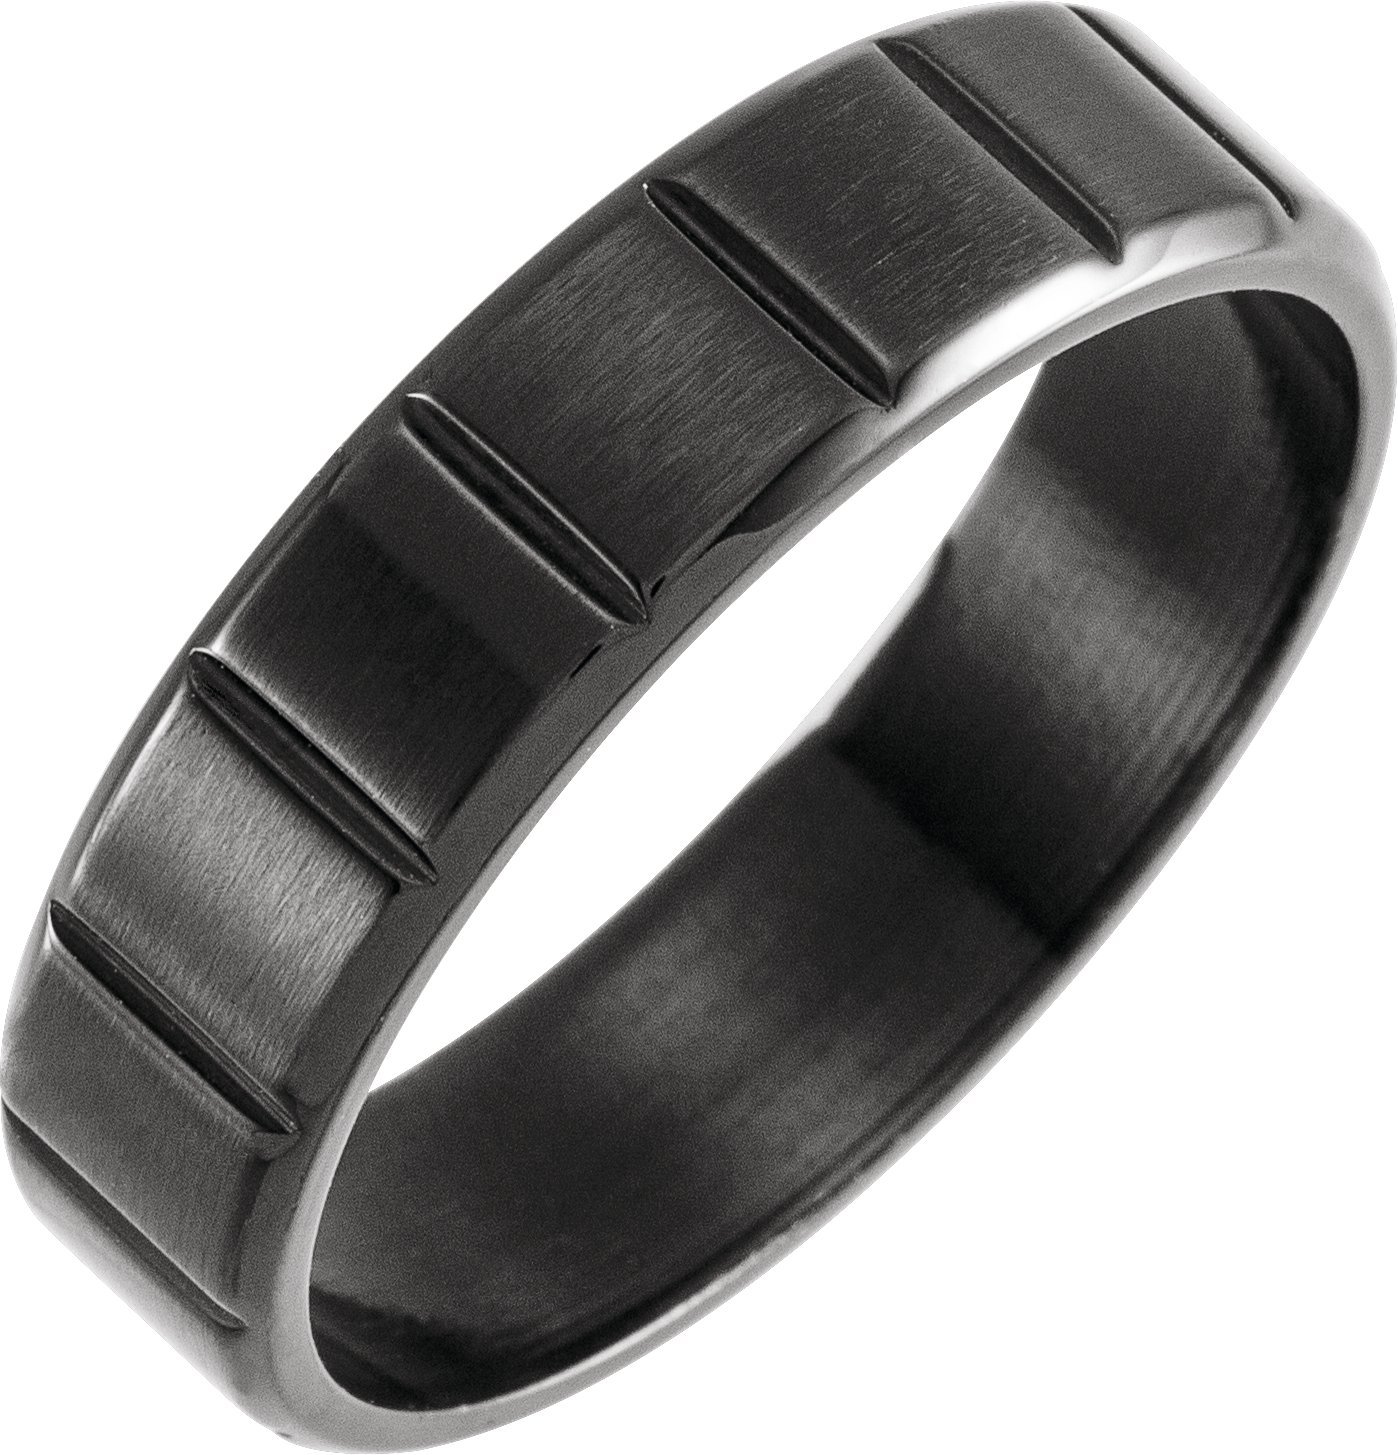 Black PVD Titanium 6 mm Grooved Band Size 7 Ref 16653724